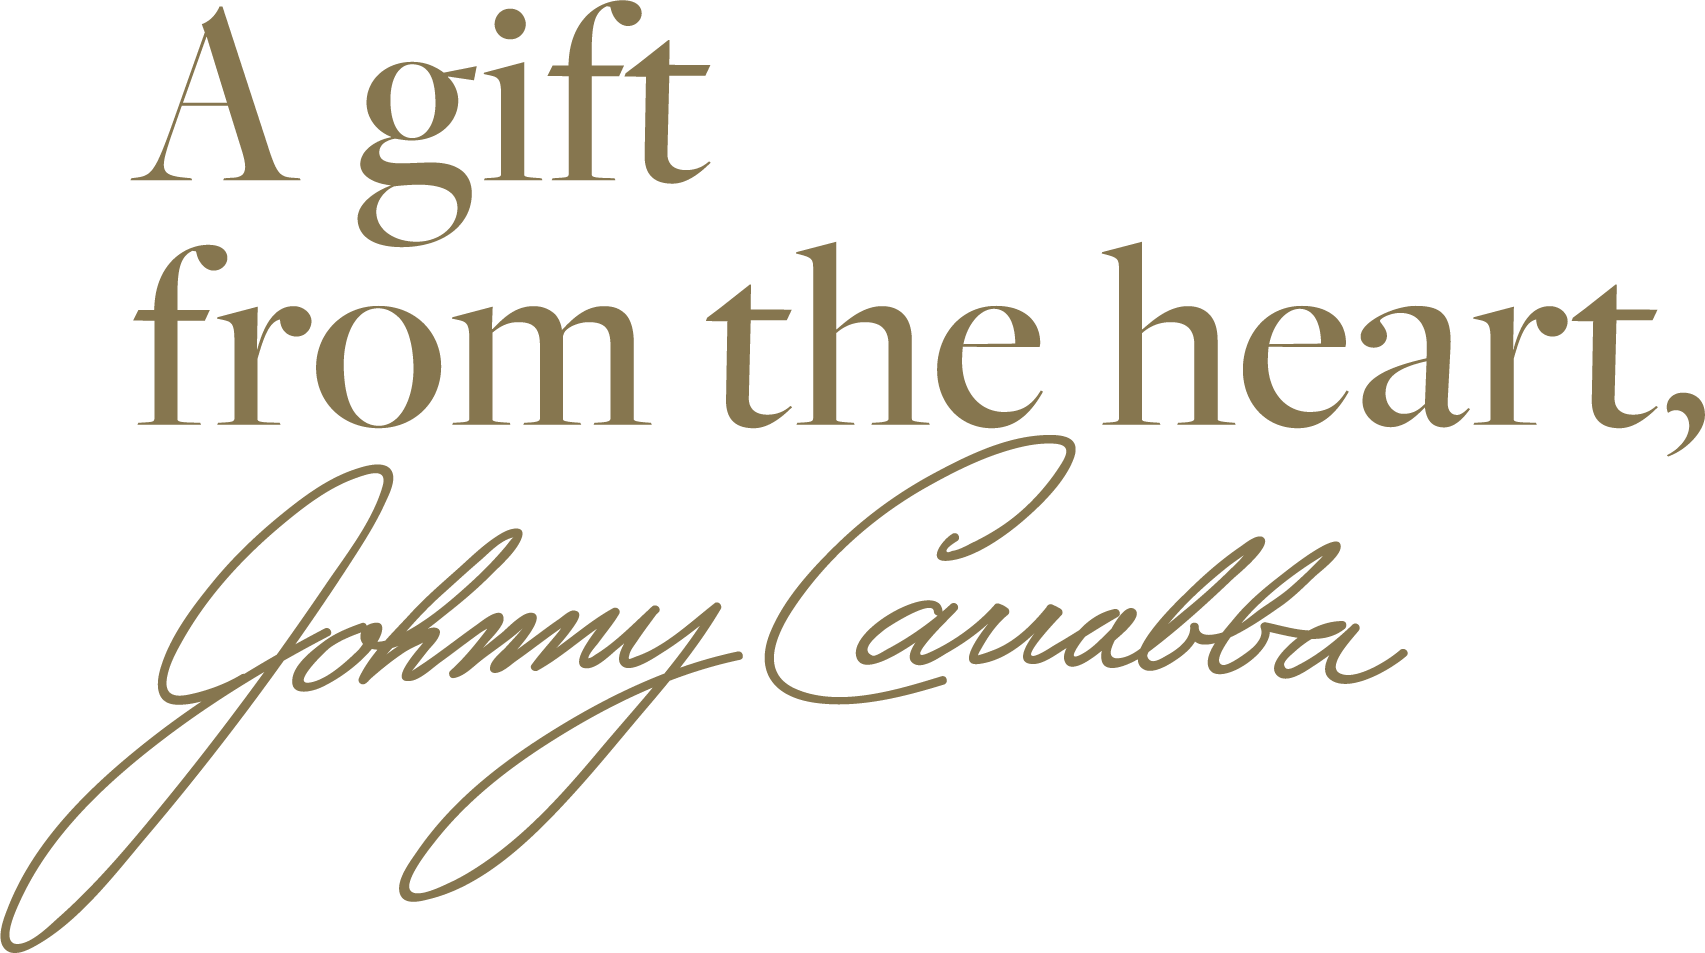 A GIFT FROM THE HEART, Johnny Carrabba